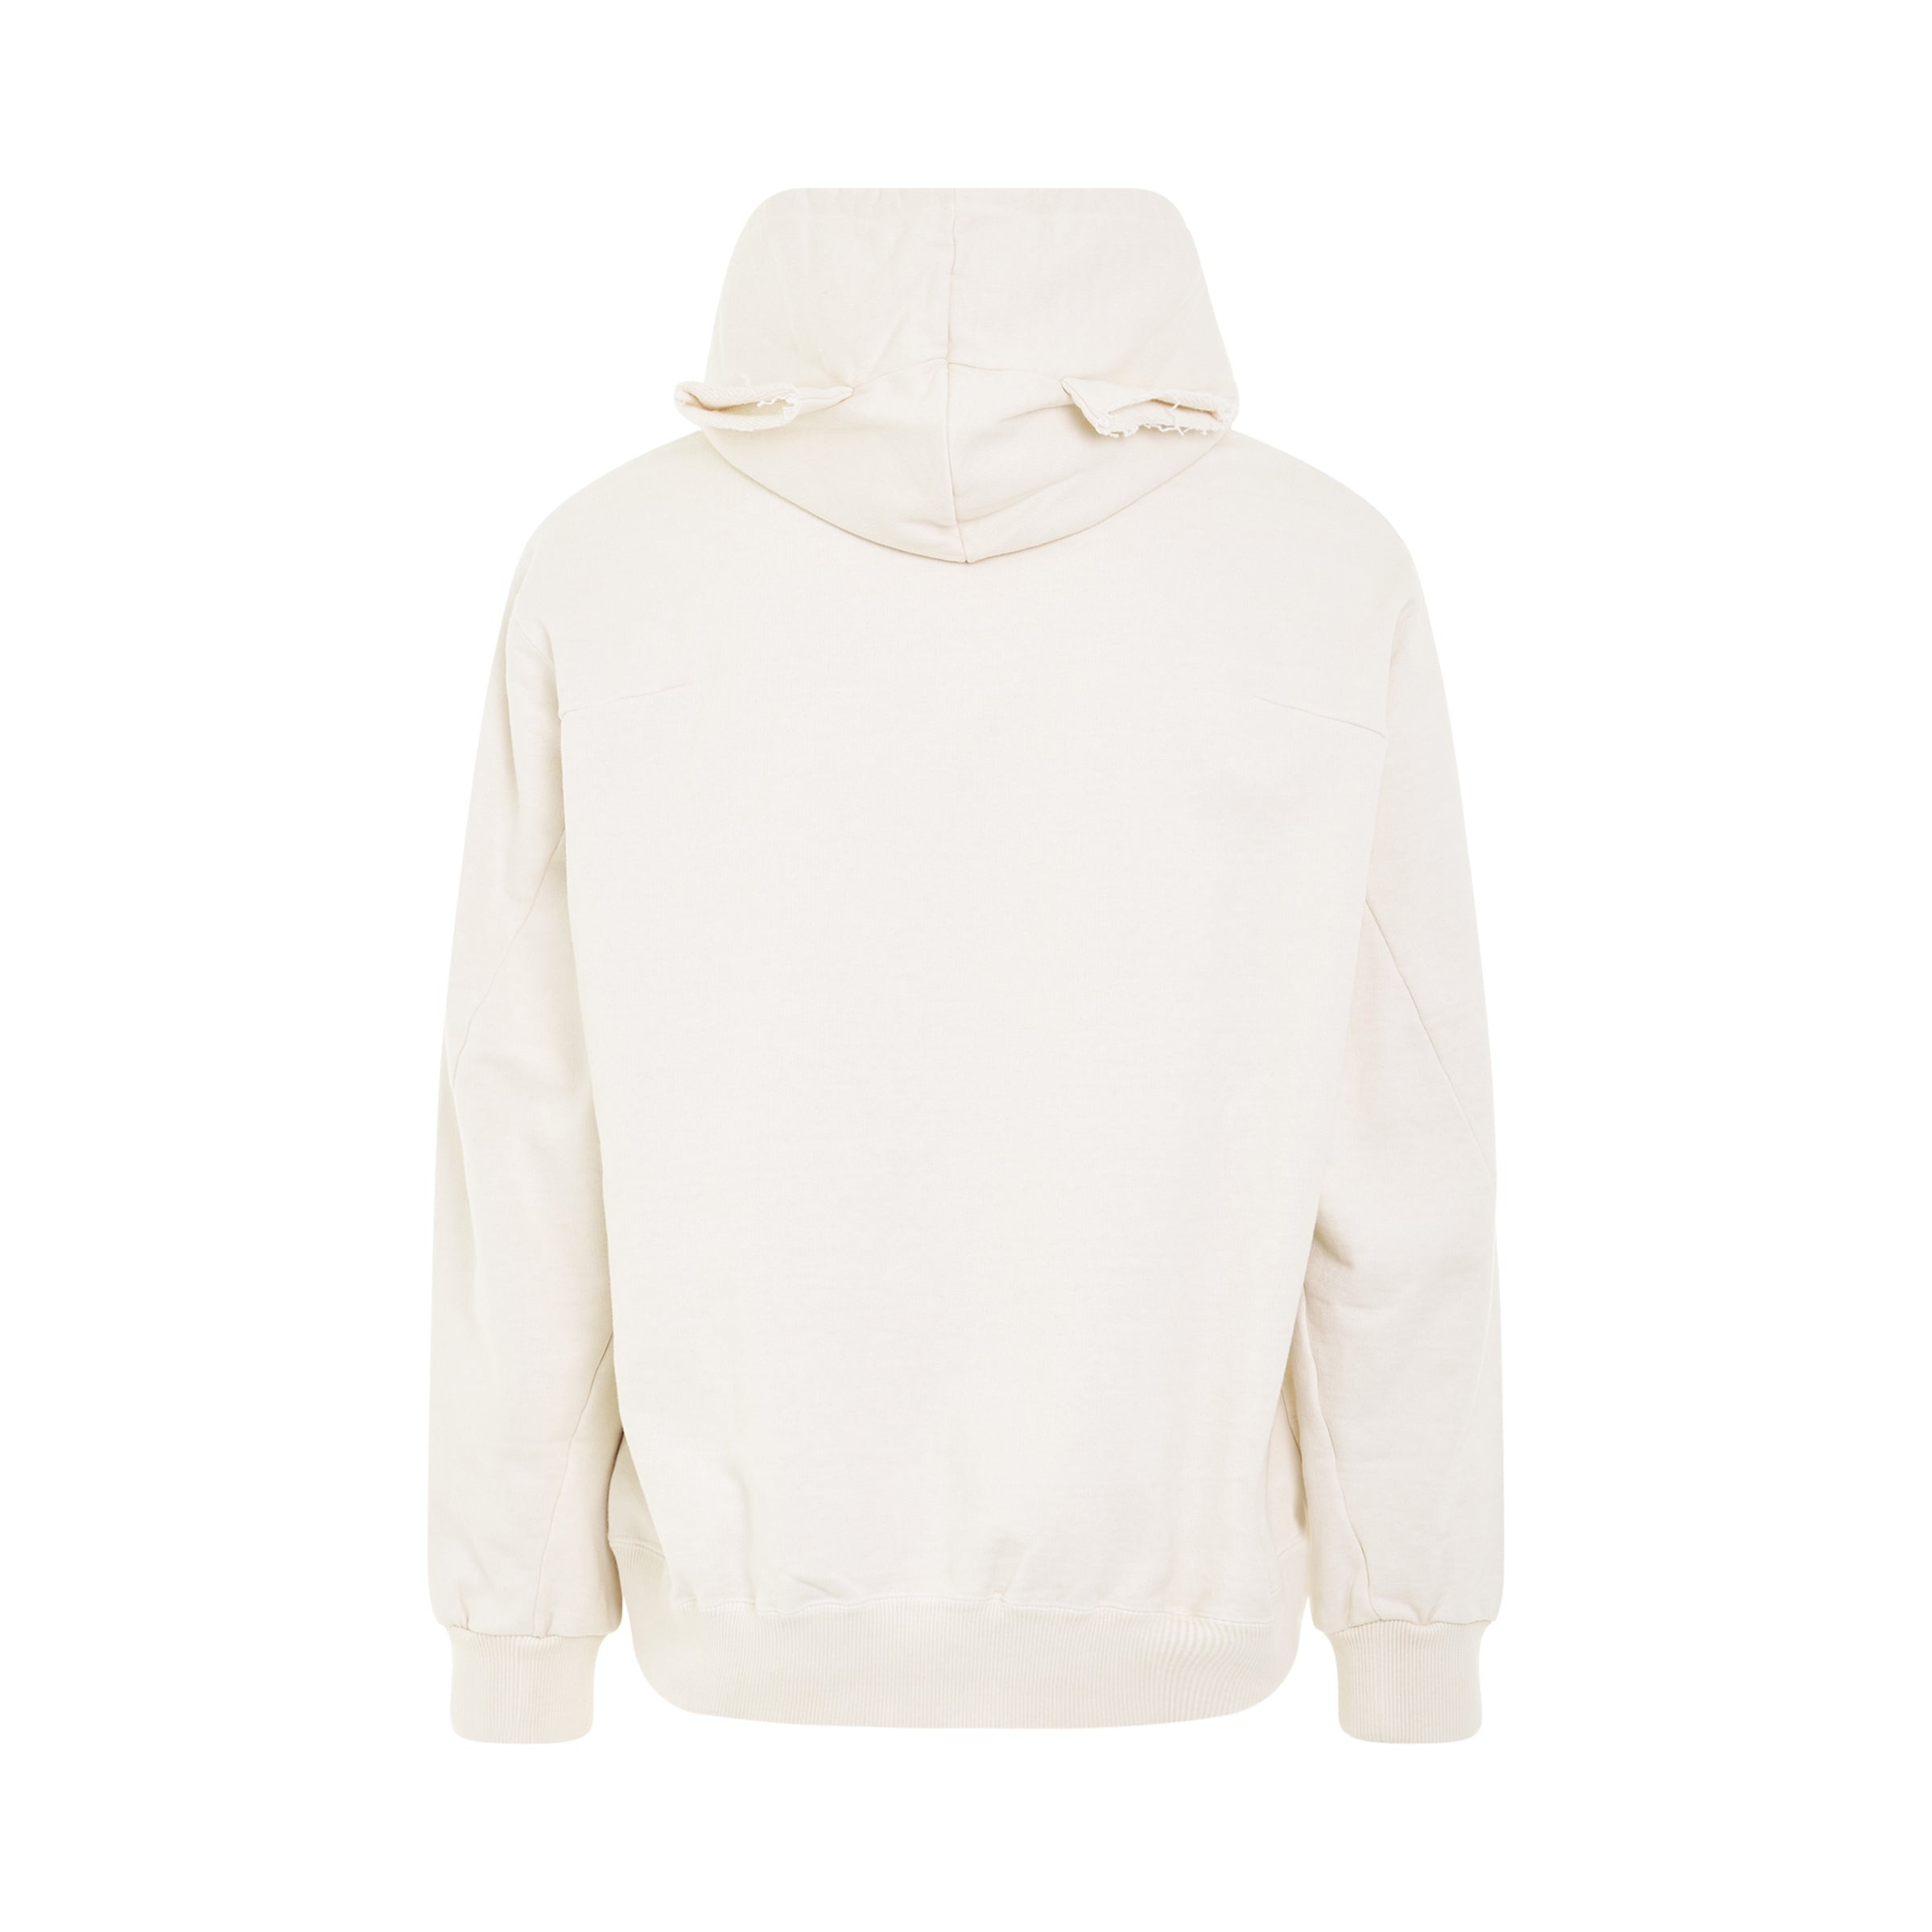 "DOUBLAND" Embroidery Hoodie in White - 4